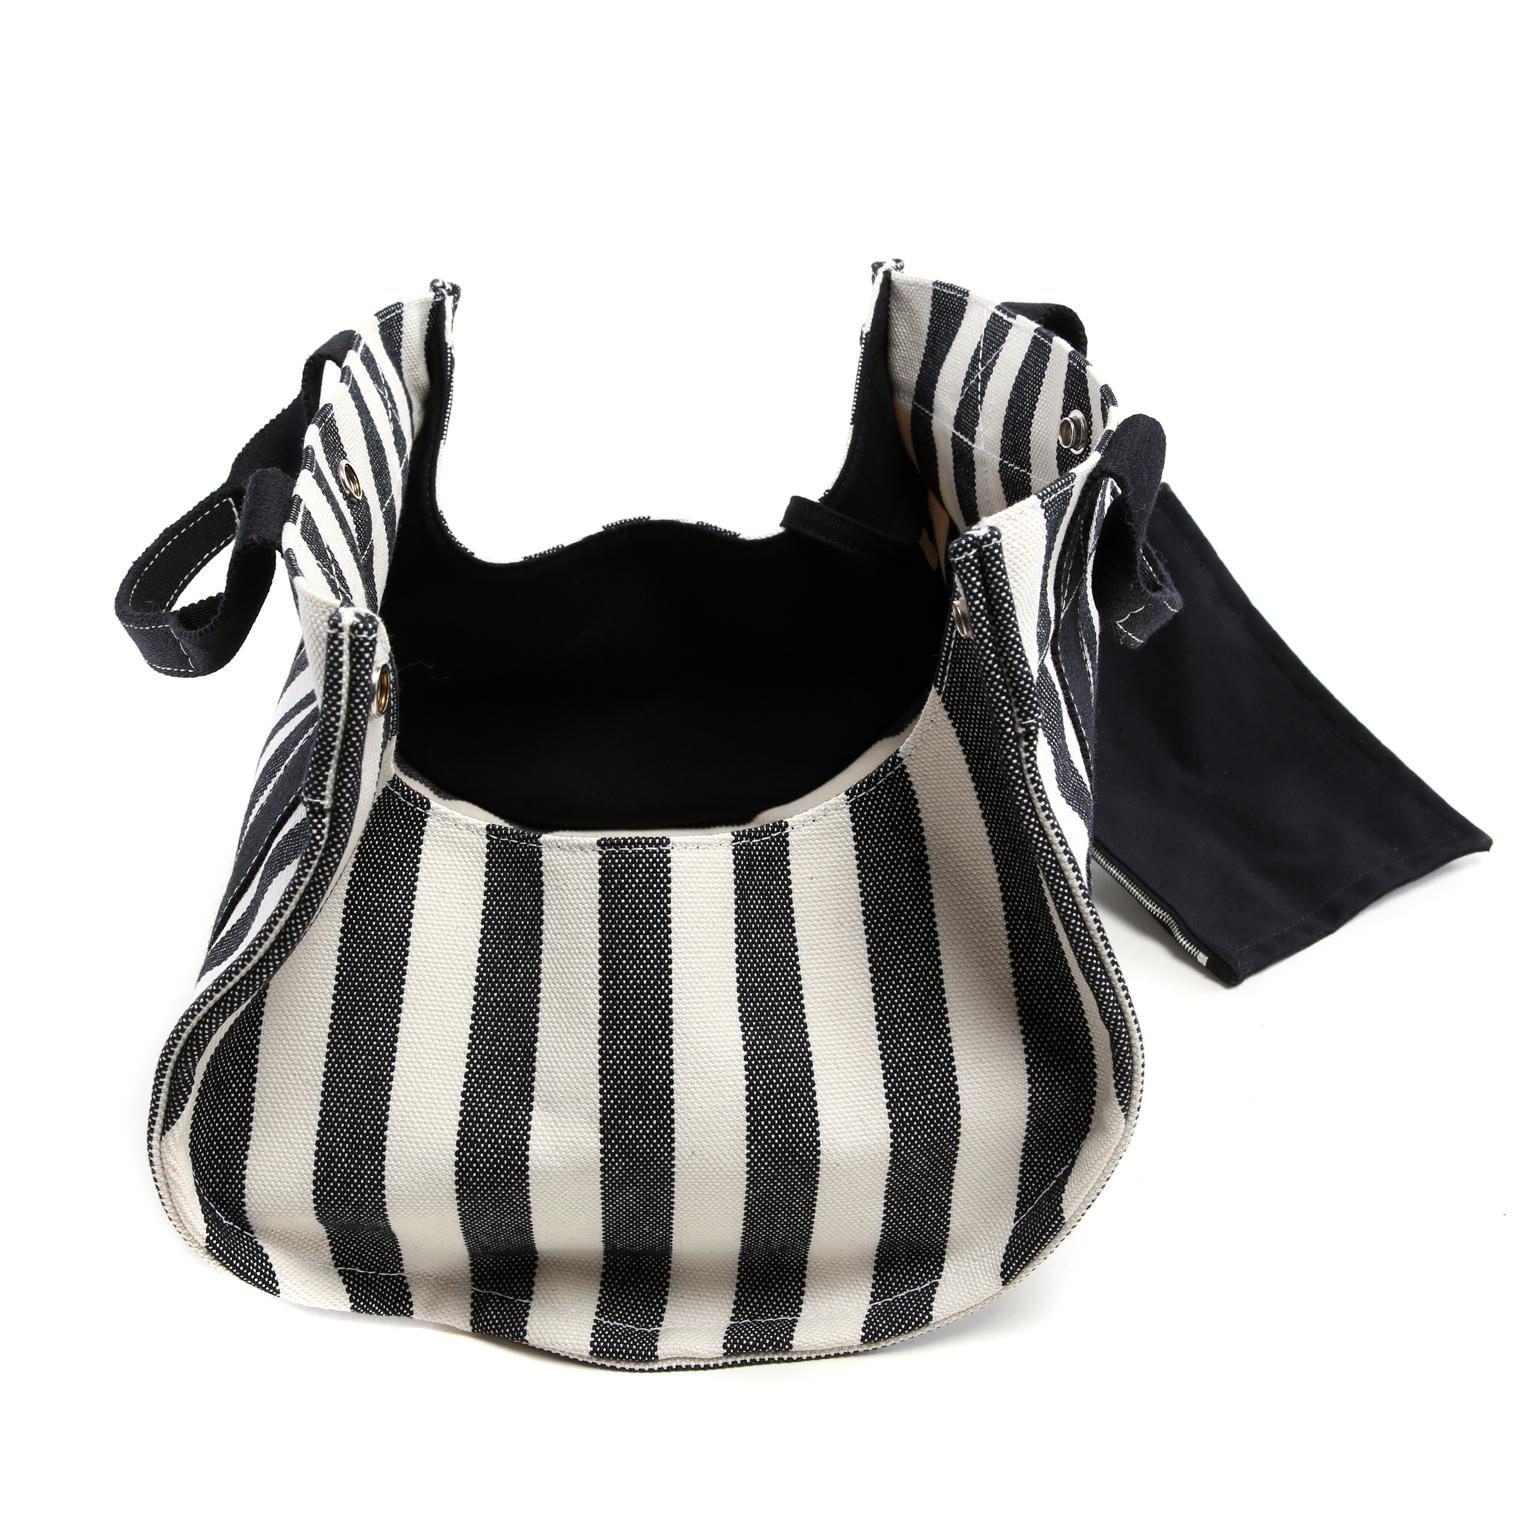 Hermes Black and White Striped Canvas Tote with pochette For Sale 5